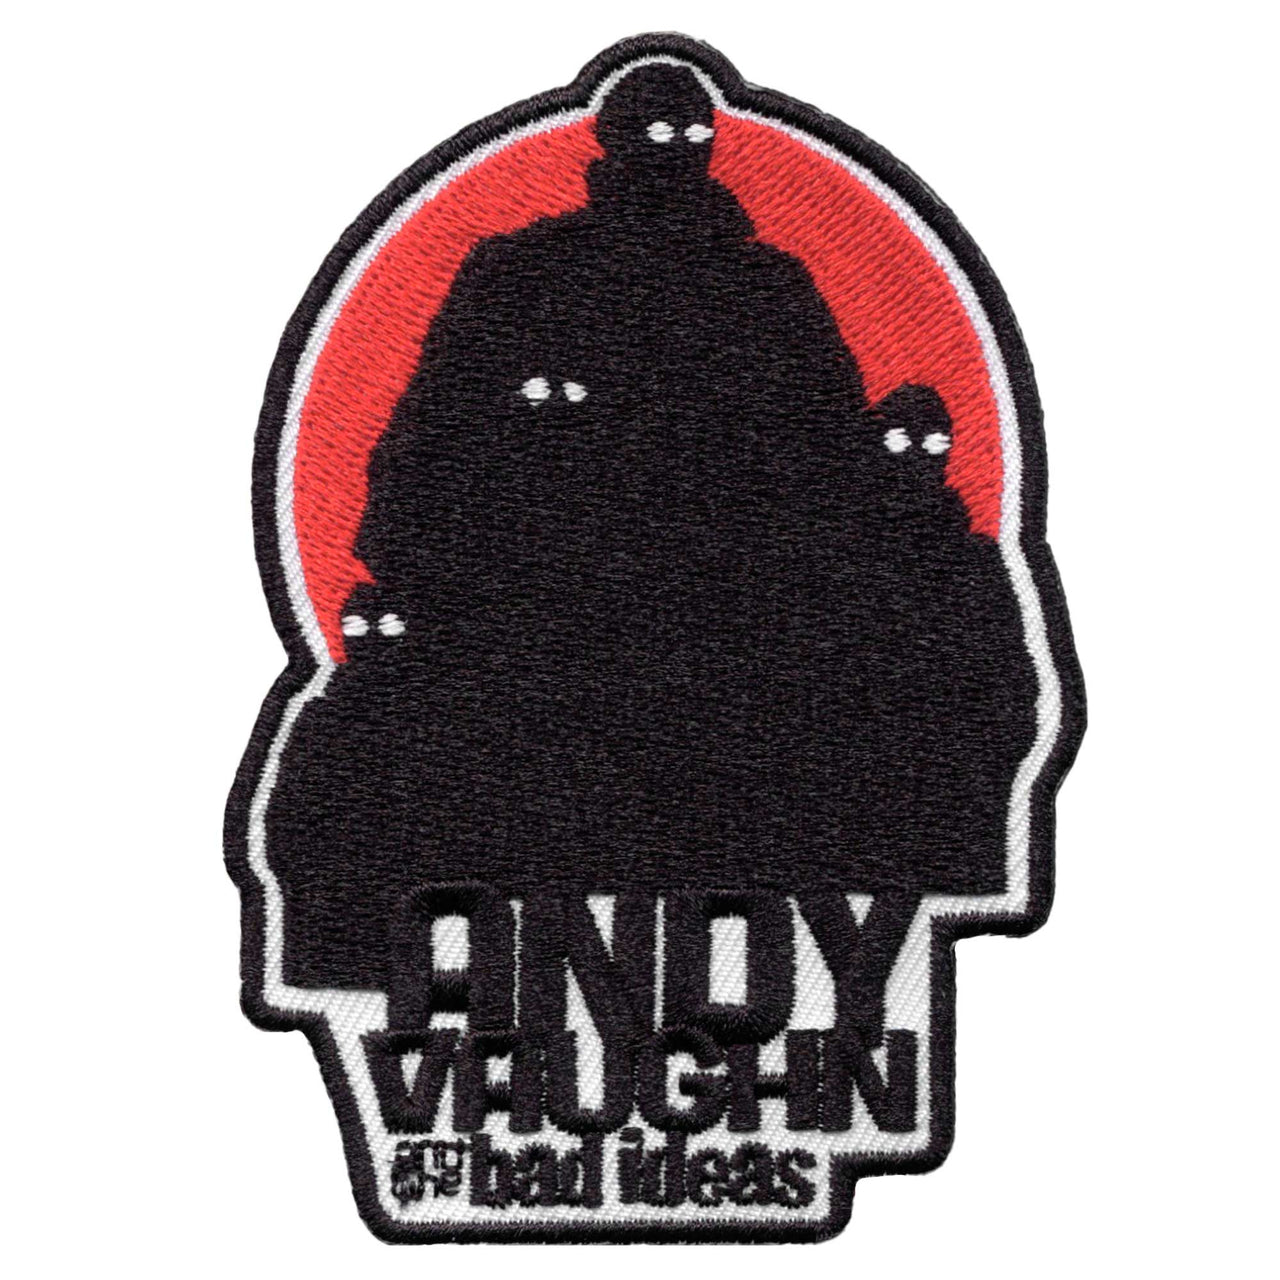 ANDY VAUGHN AND THE BAD IDEAS GROUP PATCH